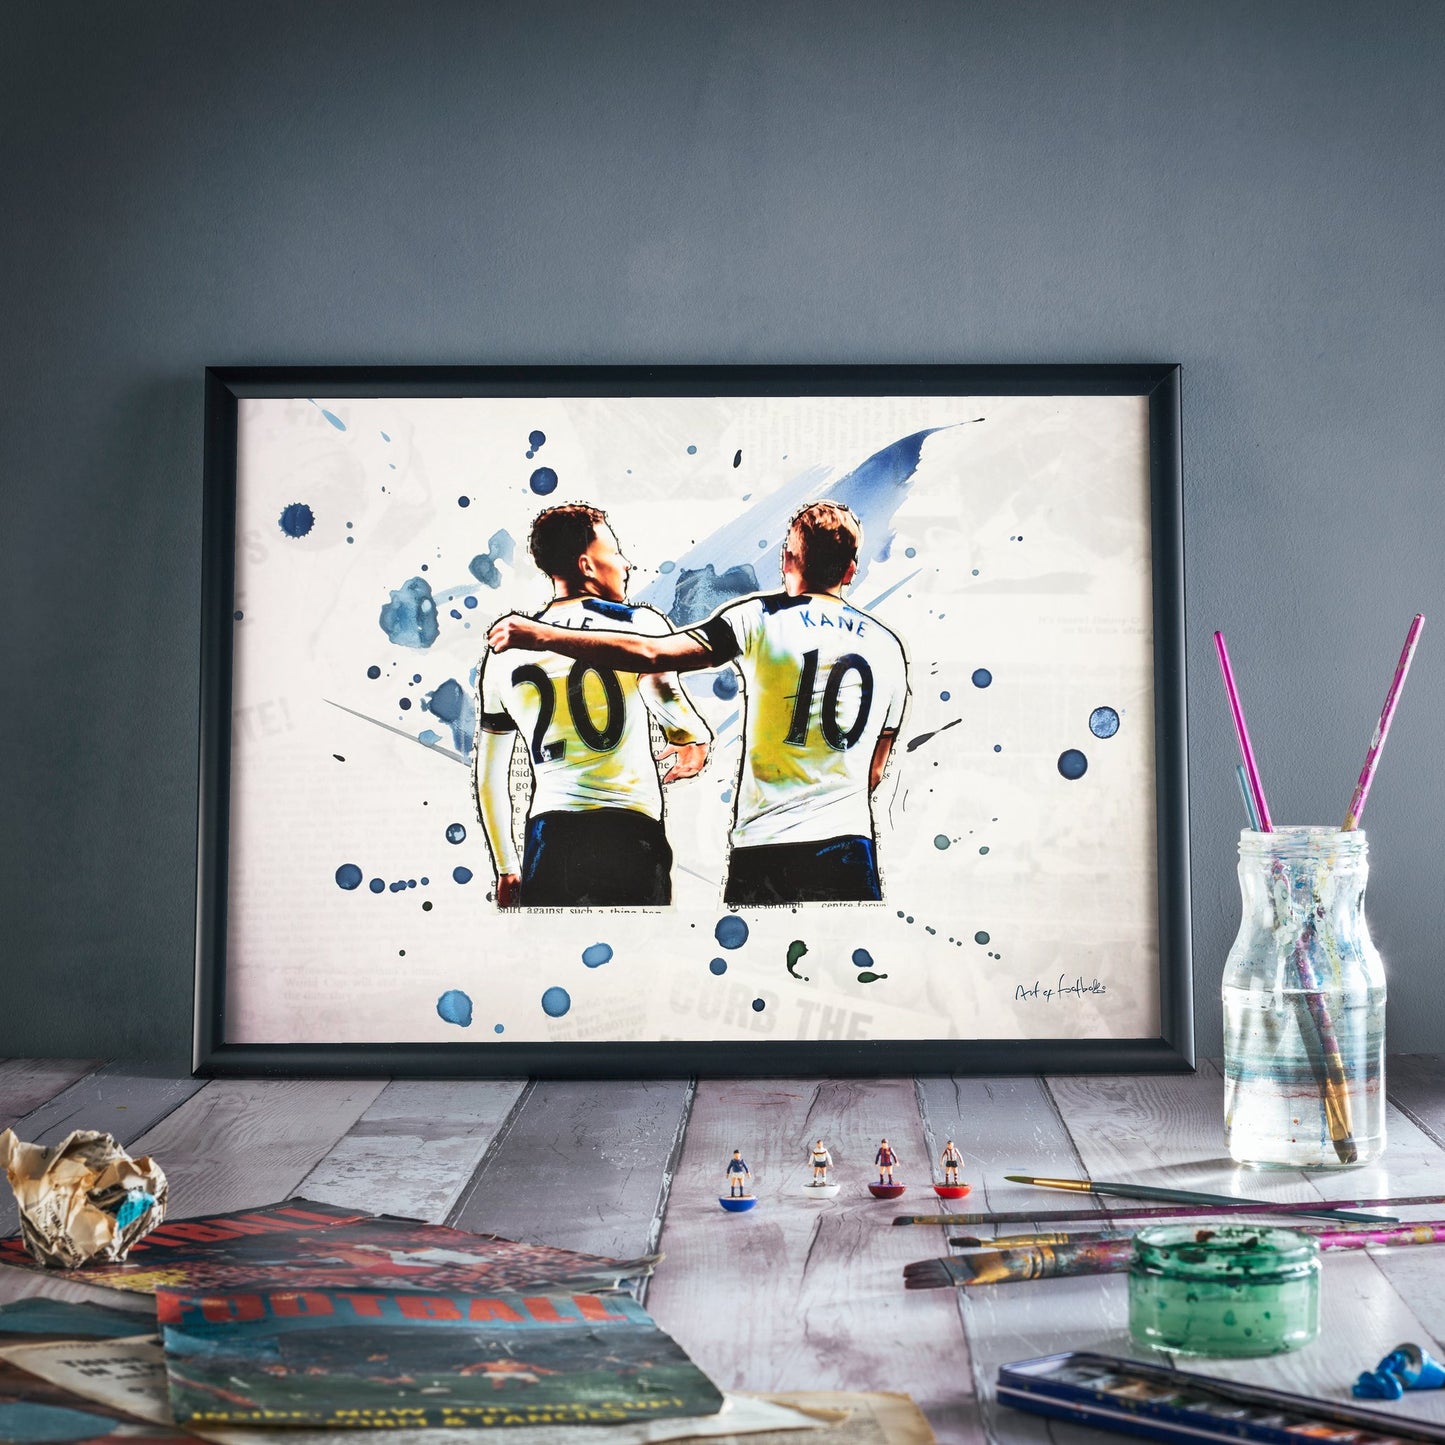 ART OF FOOTBALL- Soccer History captured in Art! - A4 Prints! Great Gifts